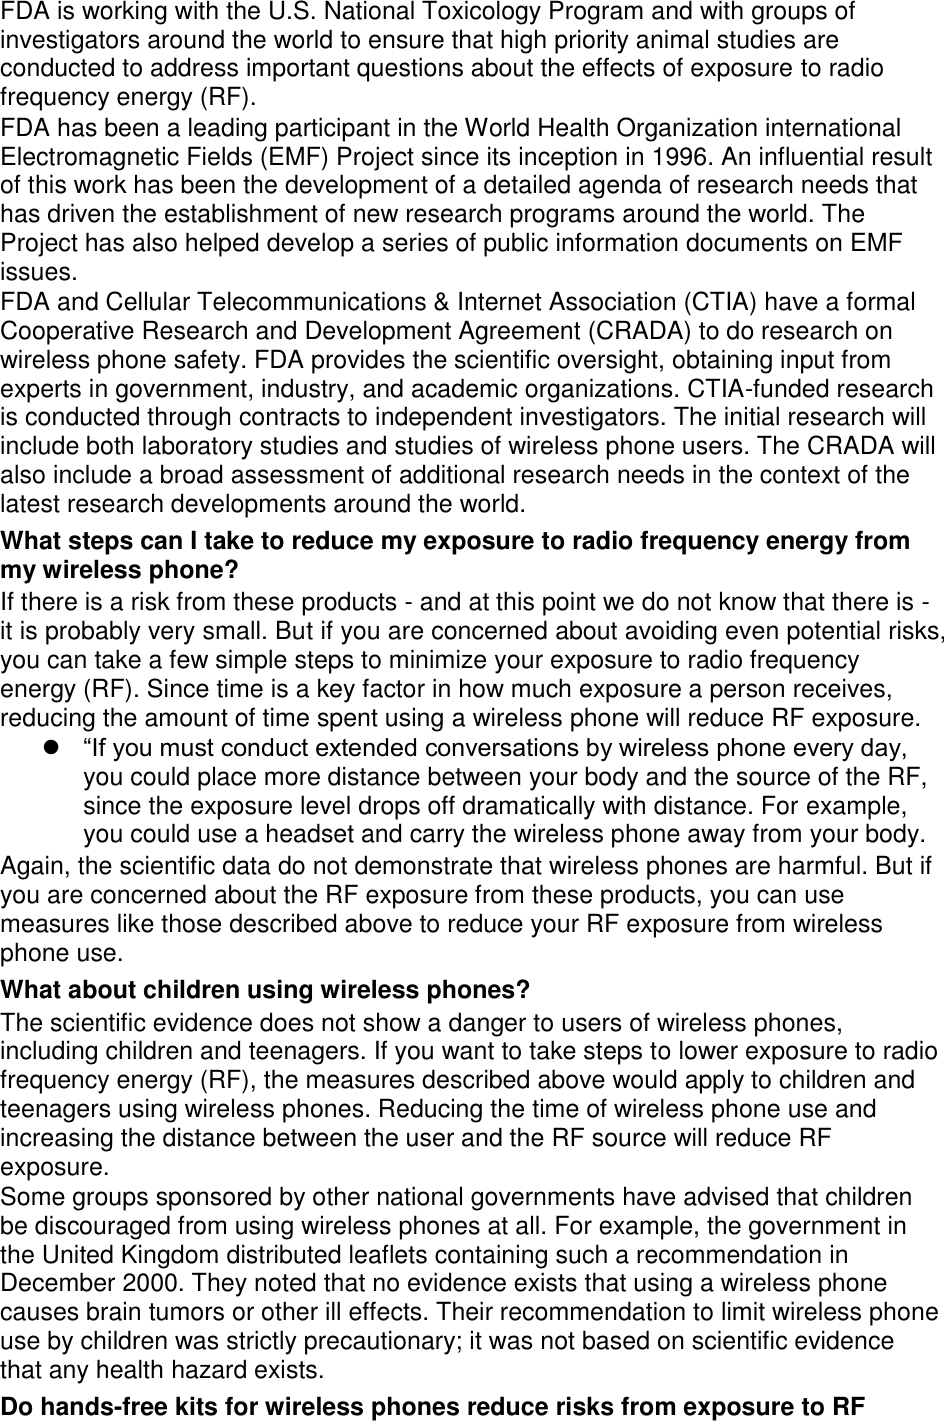 FDA is working with the U.S. National Toxicology Program and with groups of investigators around the world to ensure that high priority animal studies are conducted to address important questions about the effects of exposure to radio frequency energy (RF). FDA has been a leading participant in the World Health Organization international Electromagnetic Fields (EMF) Project since its inception in 1996. An influential result of this work has been the development of a detailed agenda of research needs that has driven the establishment of new research programs around the world. The Project has also helped develop a series of public information documents on EMF issues. FDA and Cellular Telecommunications &amp; Internet Association (CTIA) have a formal Cooperative Research and Development Agreement (CRADA) to do research on wireless phone safety. FDA provides the scientific oversight, obtaining input from experts in government, industry, and academic organizations. CTIA-funded research is conducted through contracts to independent investigators. The initial research will include both laboratory studies and studies of wireless phone users. The CRADA will also include a broad assessment of additional research needs in the context of the latest research developments around the world. What steps can I take to reduce my exposure to radio frequency energy from my wireless phone? If there is a risk from these products - and at this point we do not know that there is - it is probably very small. But if you are concerned about avoiding even potential risks, you can take a few simple steps to minimize your exposure to radio frequency energy (RF). Since time is a key factor in how much exposure a person receives, reducing the amount of time spent using a wireless phone will reduce RF exposure.  “If you must conduct extended conversations by wireless phone every day, you could place more distance between your body and the source of the RF, since the exposure level drops off dramatically with distance. For example, you could use a headset and carry the wireless phone away from your body. Again, the scientific data do not demonstrate that wireless phones are harmful. But if you are concerned about the RF exposure from these products, you can use measures like those described above to reduce your RF exposure from wireless phone use. What about children using wireless phones? The scientific evidence does not show a danger to users of wireless phones, including children and teenagers. If you want to take steps to lower exposure to radio frequency energy (RF), the measures described above would apply to children and teenagers using wireless phones. Reducing the time of wireless phone use and increasing the distance between the user and the RF source will reduce RF exposure. Some groups sponsored by other national governments have advised that children be discouraged from using wireless phones at all. For example, the government in the United Kingdom distributed leaflets containing such a recommendation in December 2000. They noted that no evidence exists that using a wireless phone causes brain tumors or other ill effects. Their recommendation to limit wireless phone use by children was strictly precautionary; it was not based on scientific evidence that any health hazard exists.   Do hands-free kits for wireless phones reduce risks from exposure to RF 